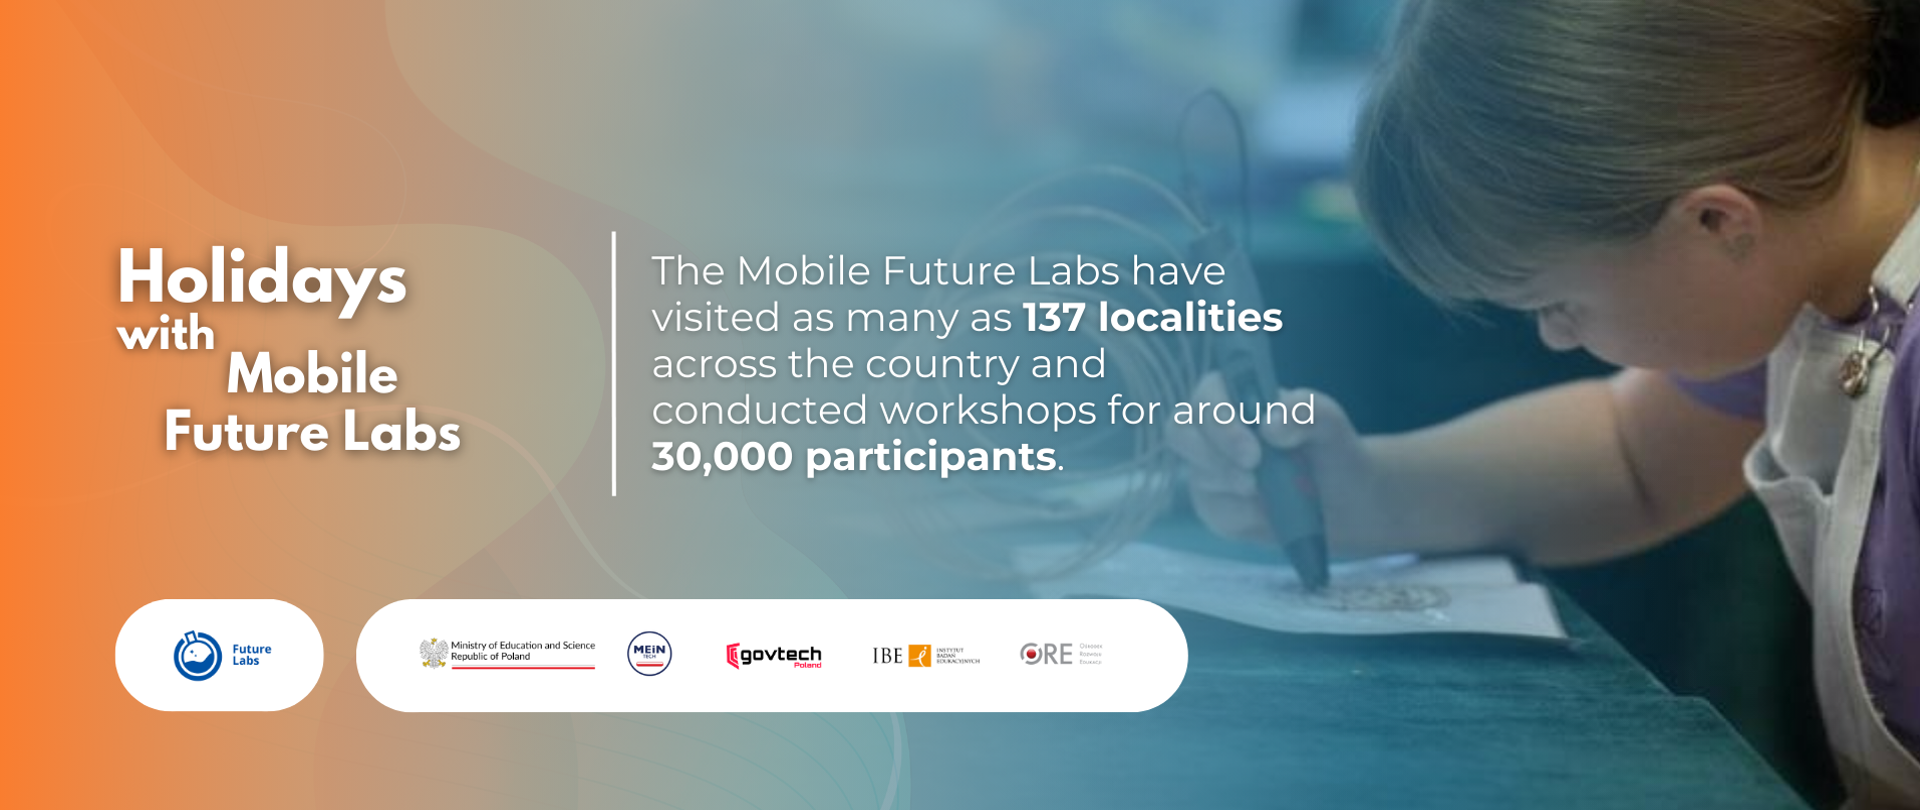 Holidays with Mobile Future Labs
The Mobile Future Labs have visited as many as 137 localities across the country and conducted workshops for around 30,000 participants.